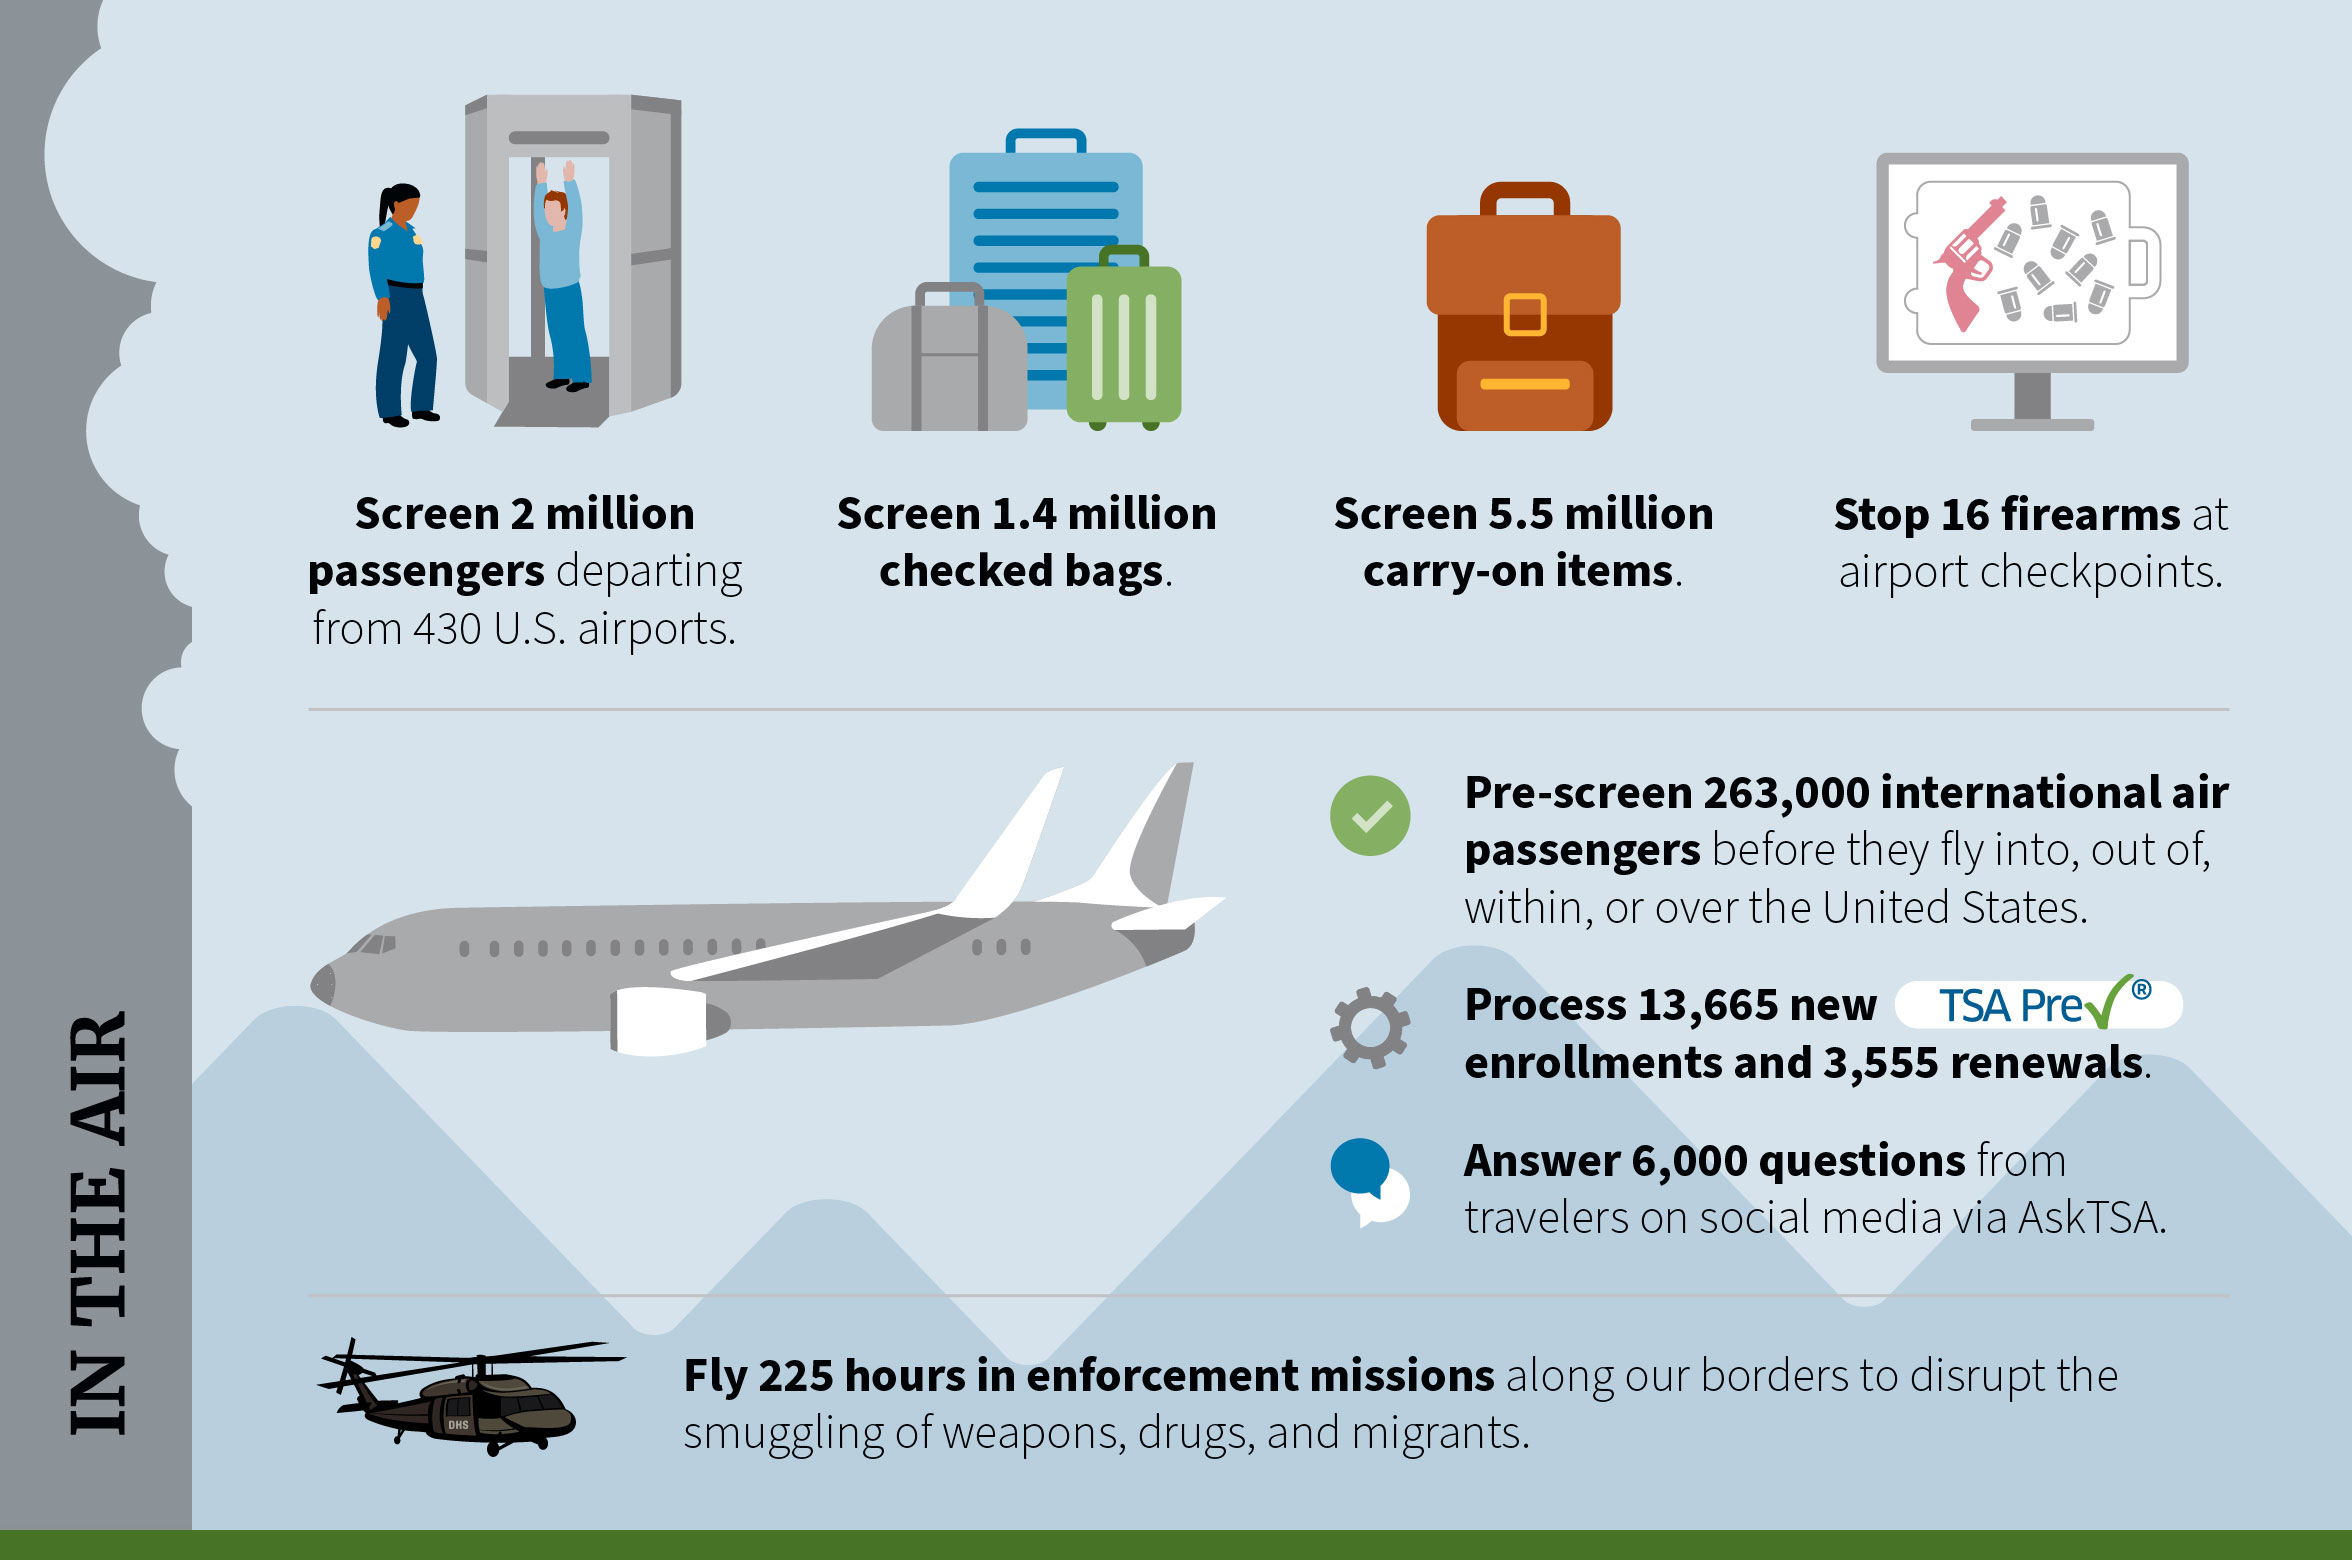  In the Air: Screen 2 million passengers departing from 430 U.S. airports. Screen 1.4 million checked bags. Screen 5.5 million carry-on items. Stop 16 firearms at airport checkpoints. Pre-screen 263,000 international air passengers before they fly into, out of, within, or over the United States. Process 13,665 new TSA PreCheck enrollments and 3,555 renewals. Answer 6,000 questions from travelers on social media via AskTsa. Fly 225 hours in enforcement missions along our borders to disrupt the smuggling of weapons, drugs, and migrants. 